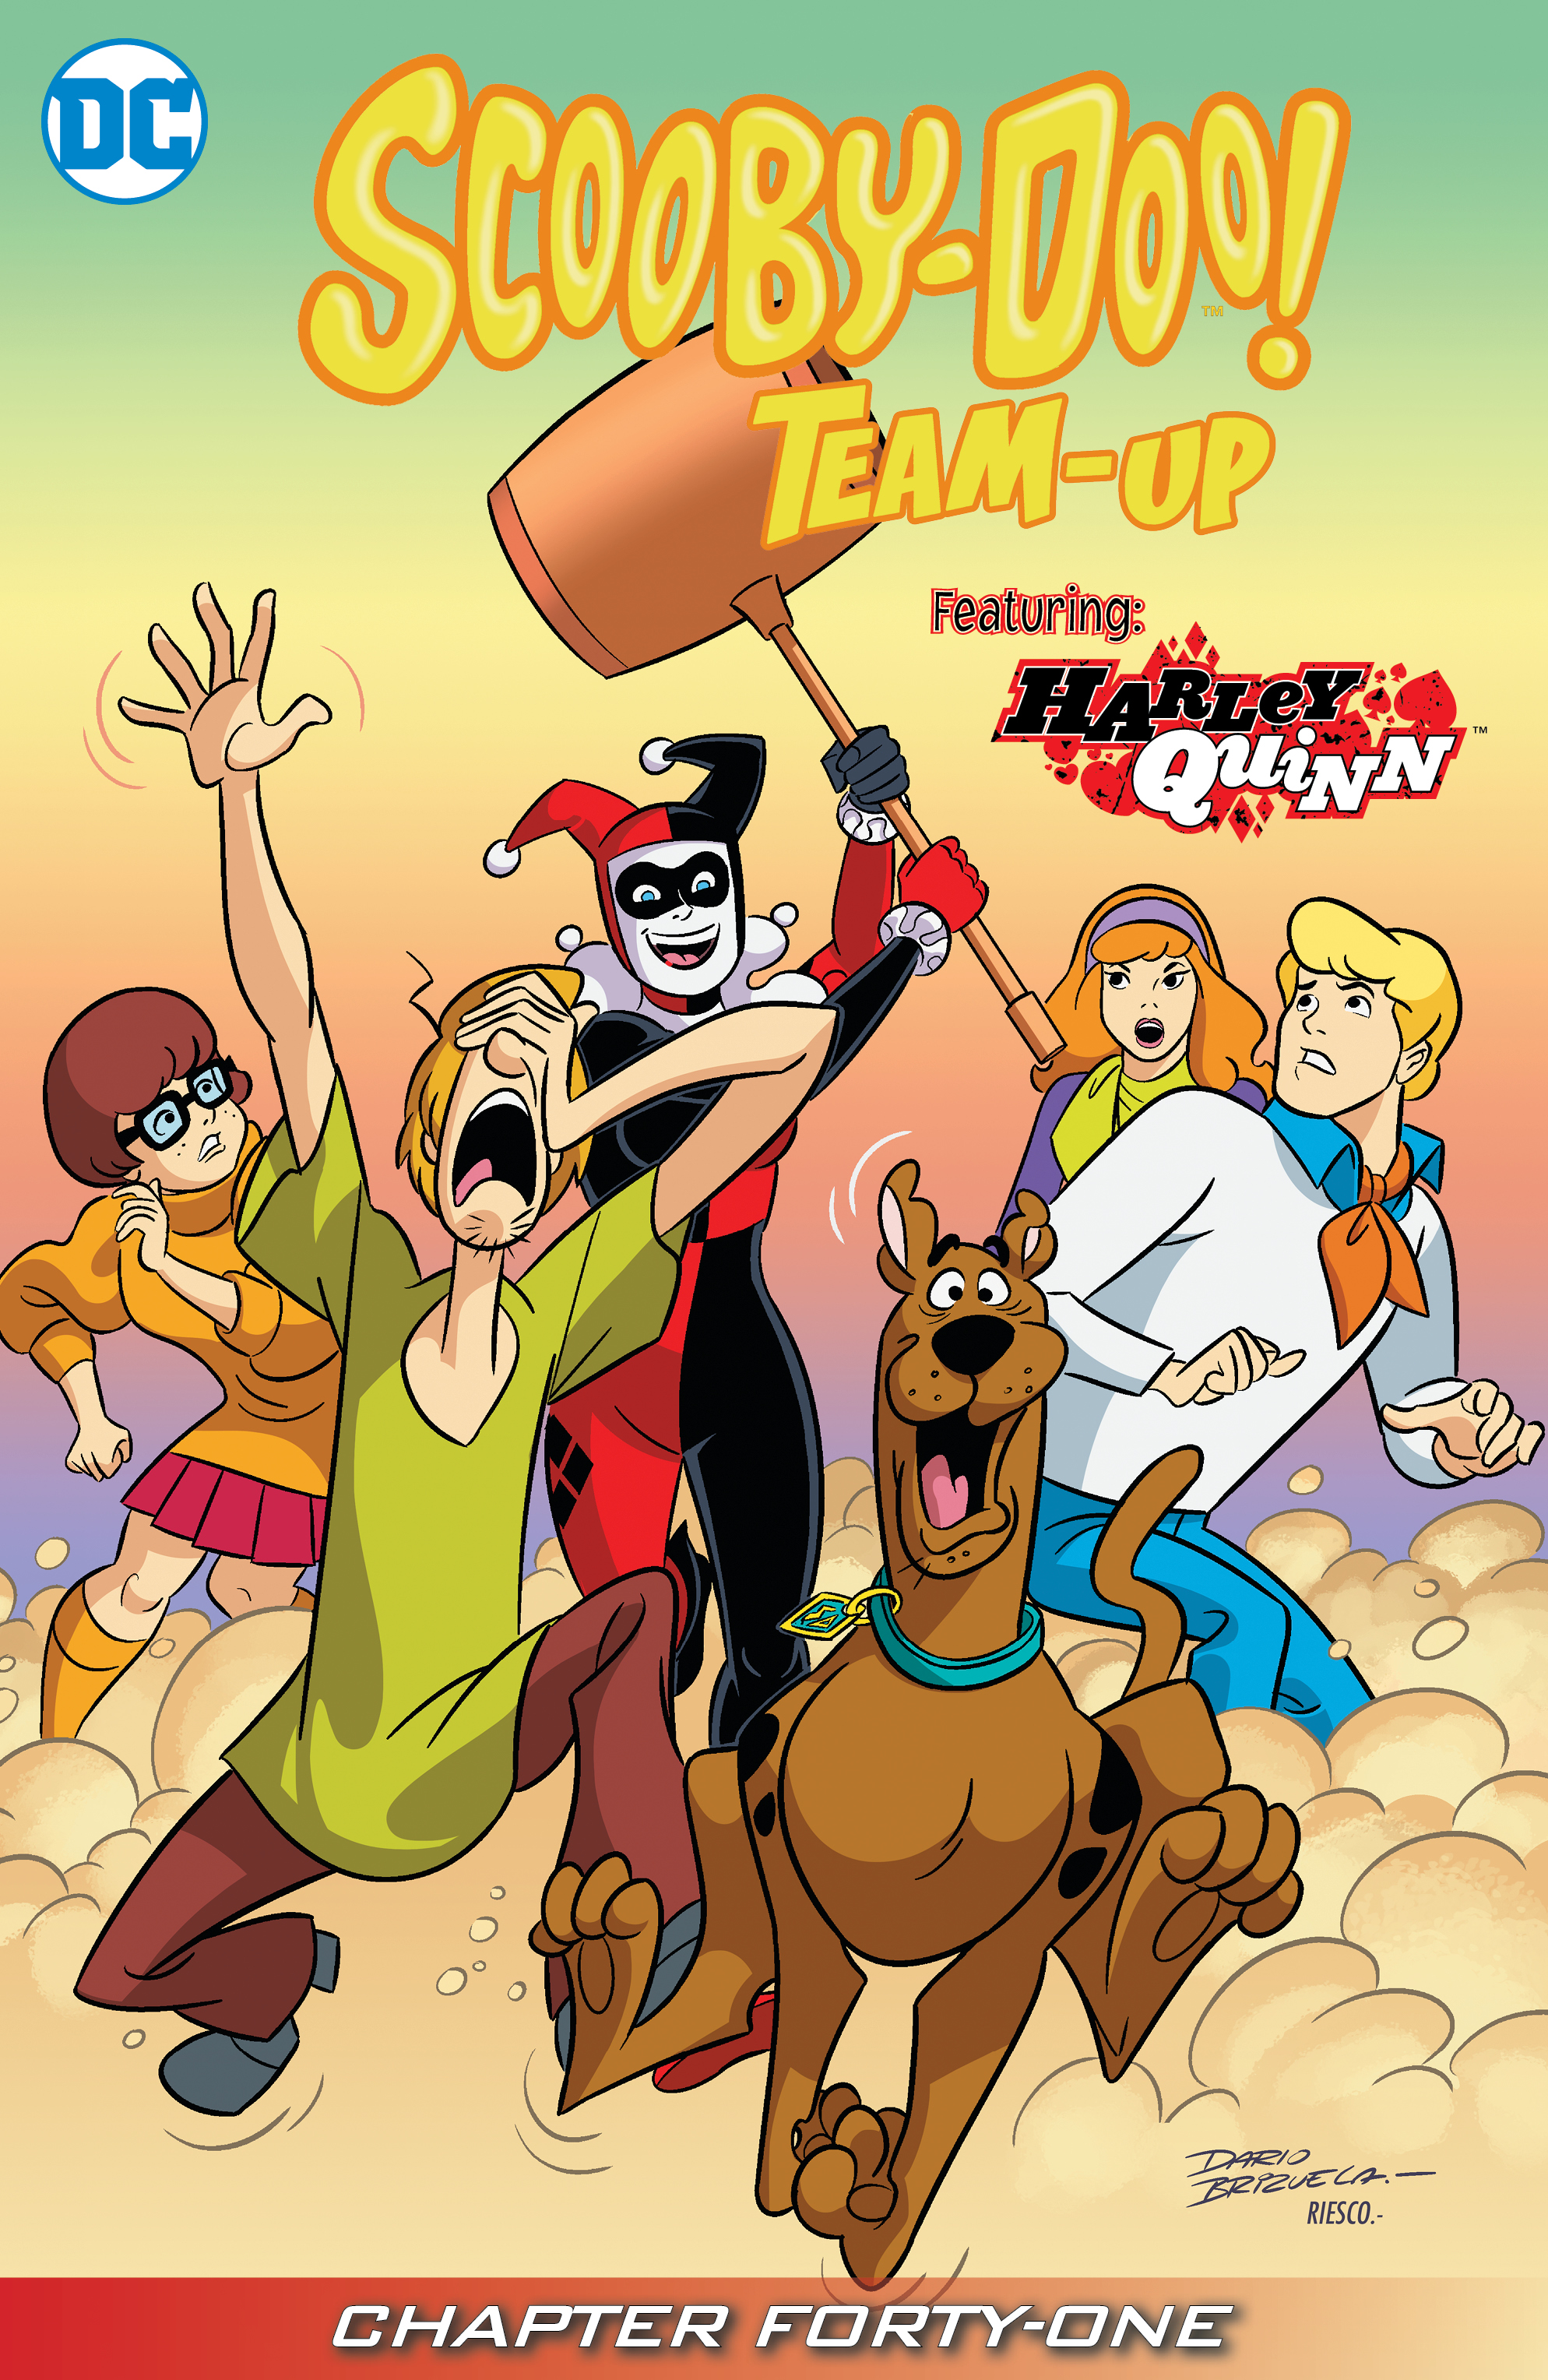 Scooby-Doo Team-Up #41 preview images